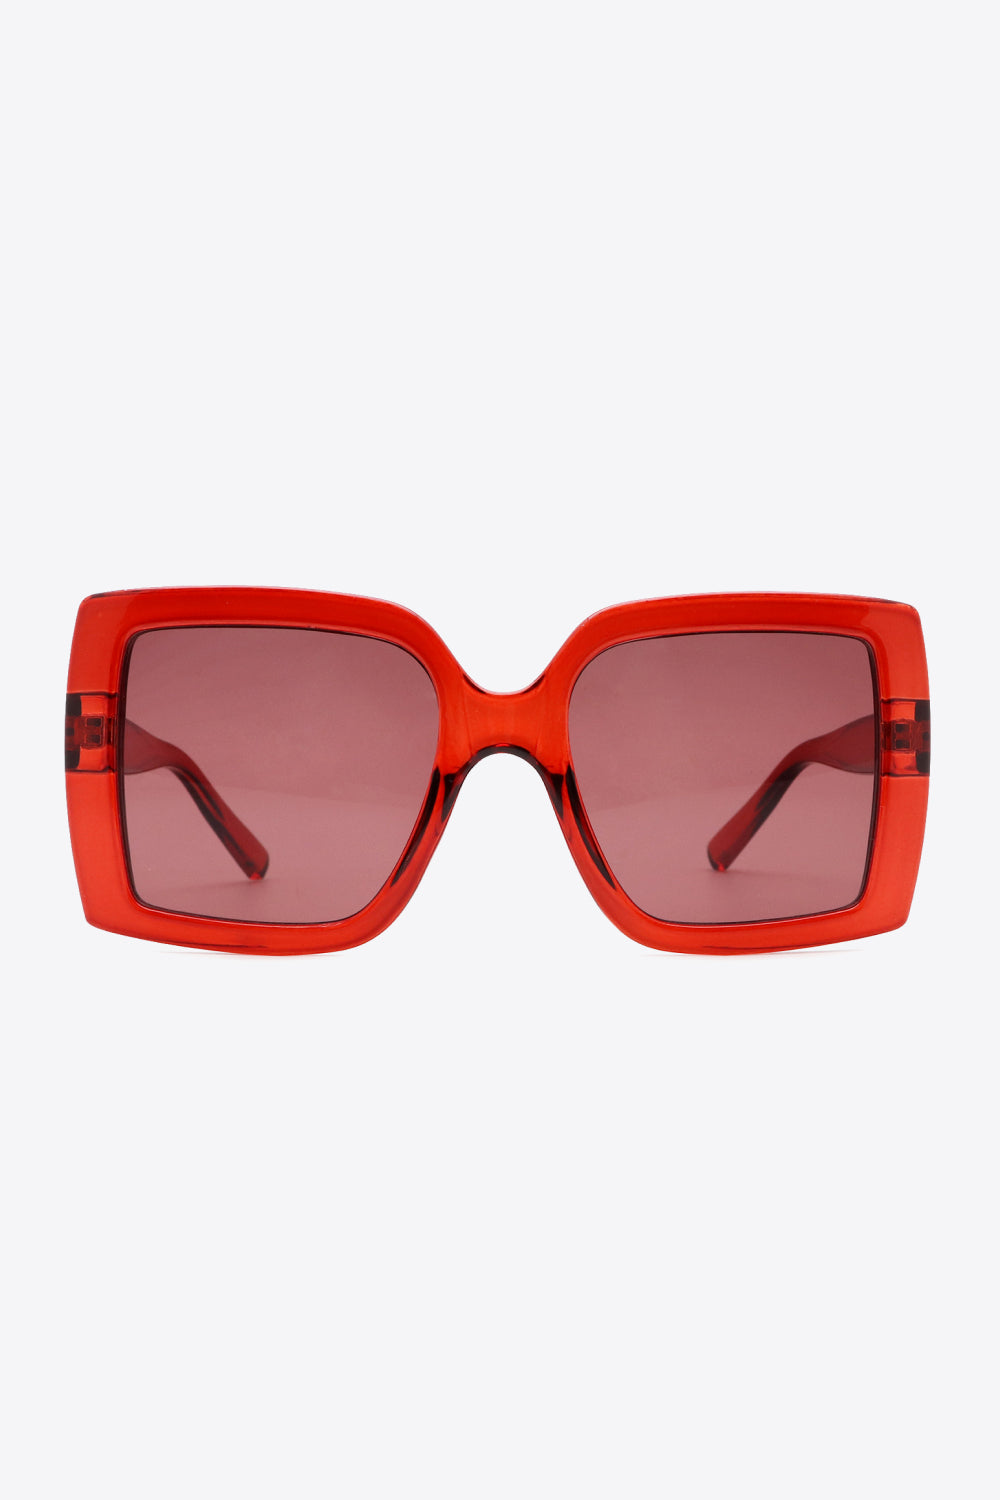 70's Hollywood Red Acetate Lens Square Frame Sunglasses